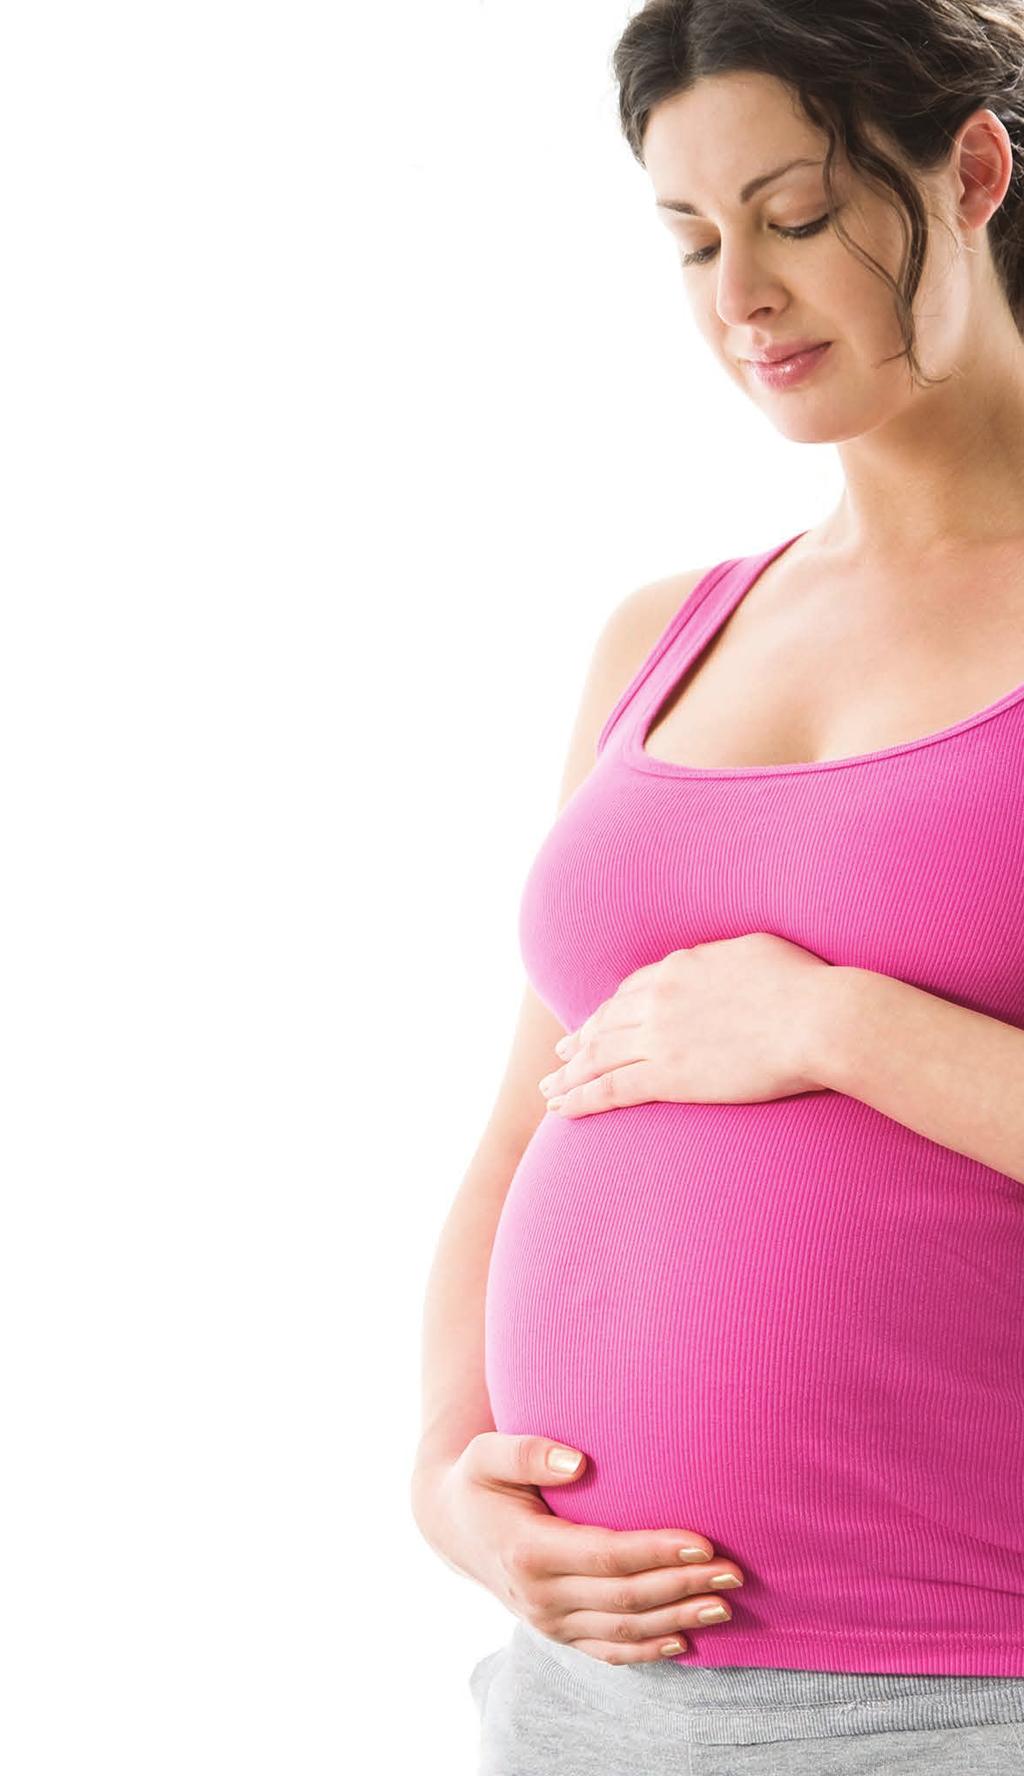 Pregnancy and nicotine replacement